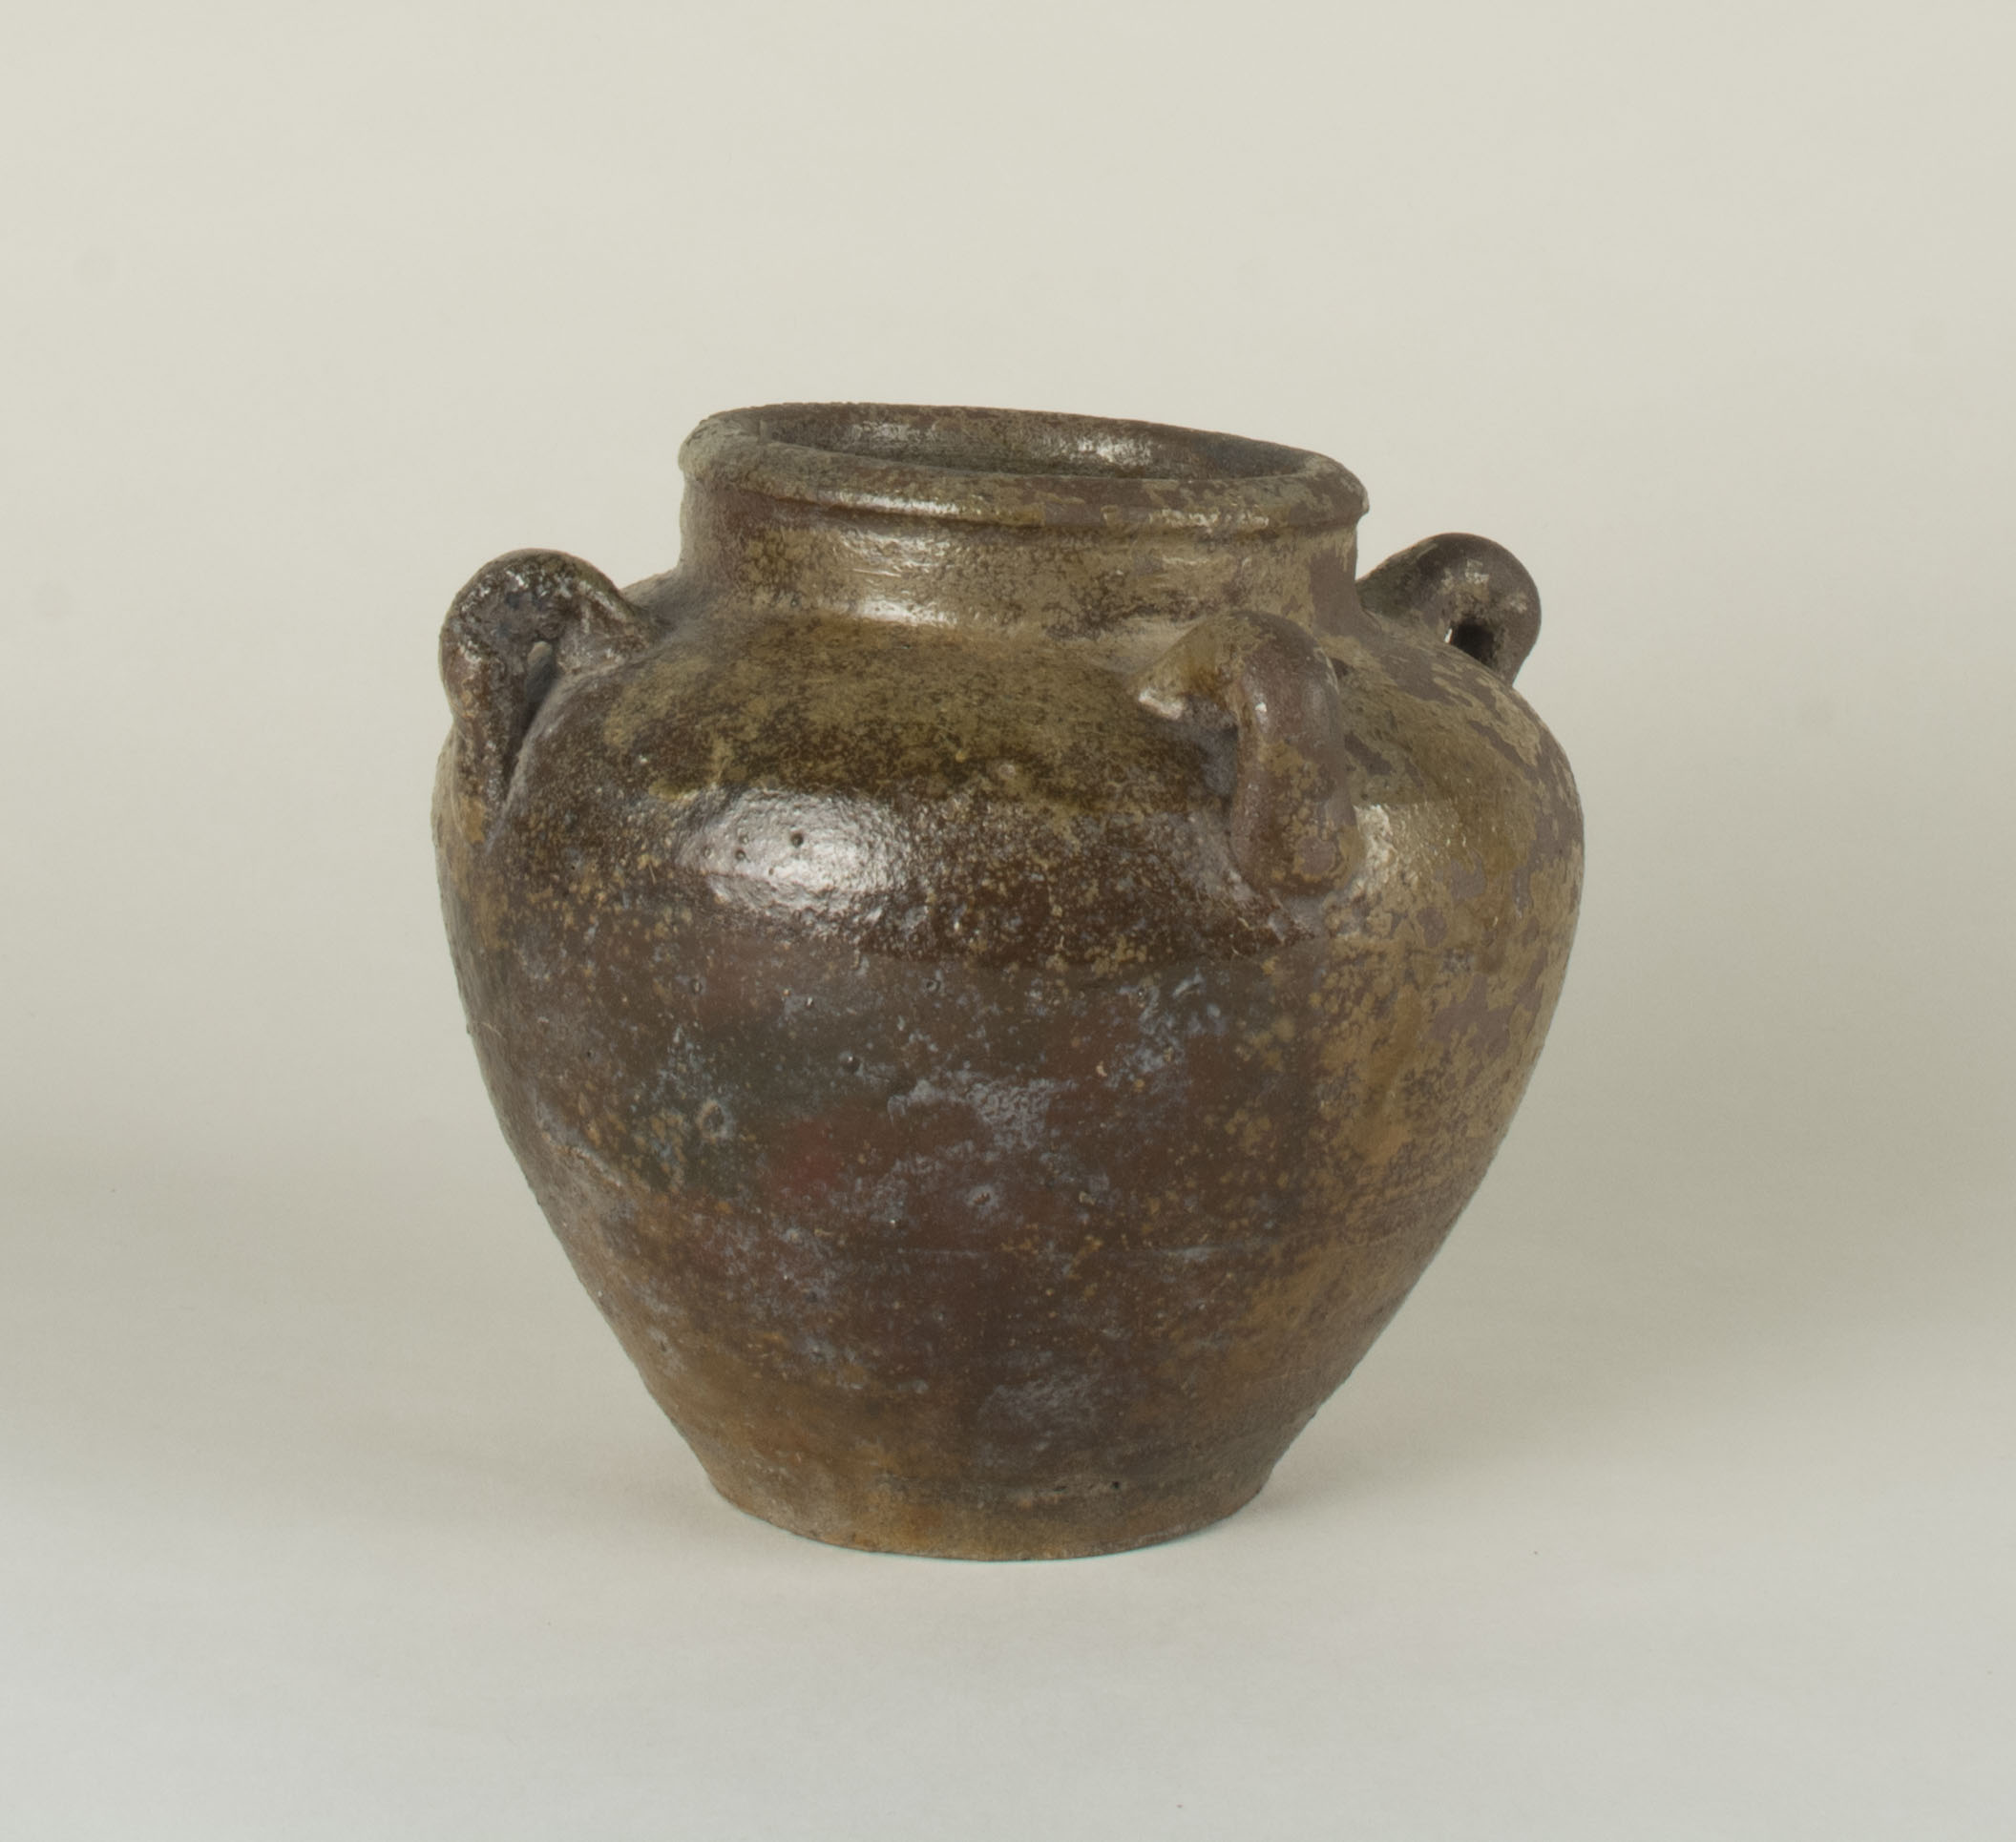 Caldera owned by Virginia Capulong.Clay pot. Family object from the Philippines. Although they do not use this one, caderas are often used and can be found in many homes. Acquisition date unknown. Any views, findings, conclusions, or recommendations expressed in this story do not necessarily represent those of the National Endowment for the Humanities. (c) Field Museum of Natural History - CC BY-NC 4.0